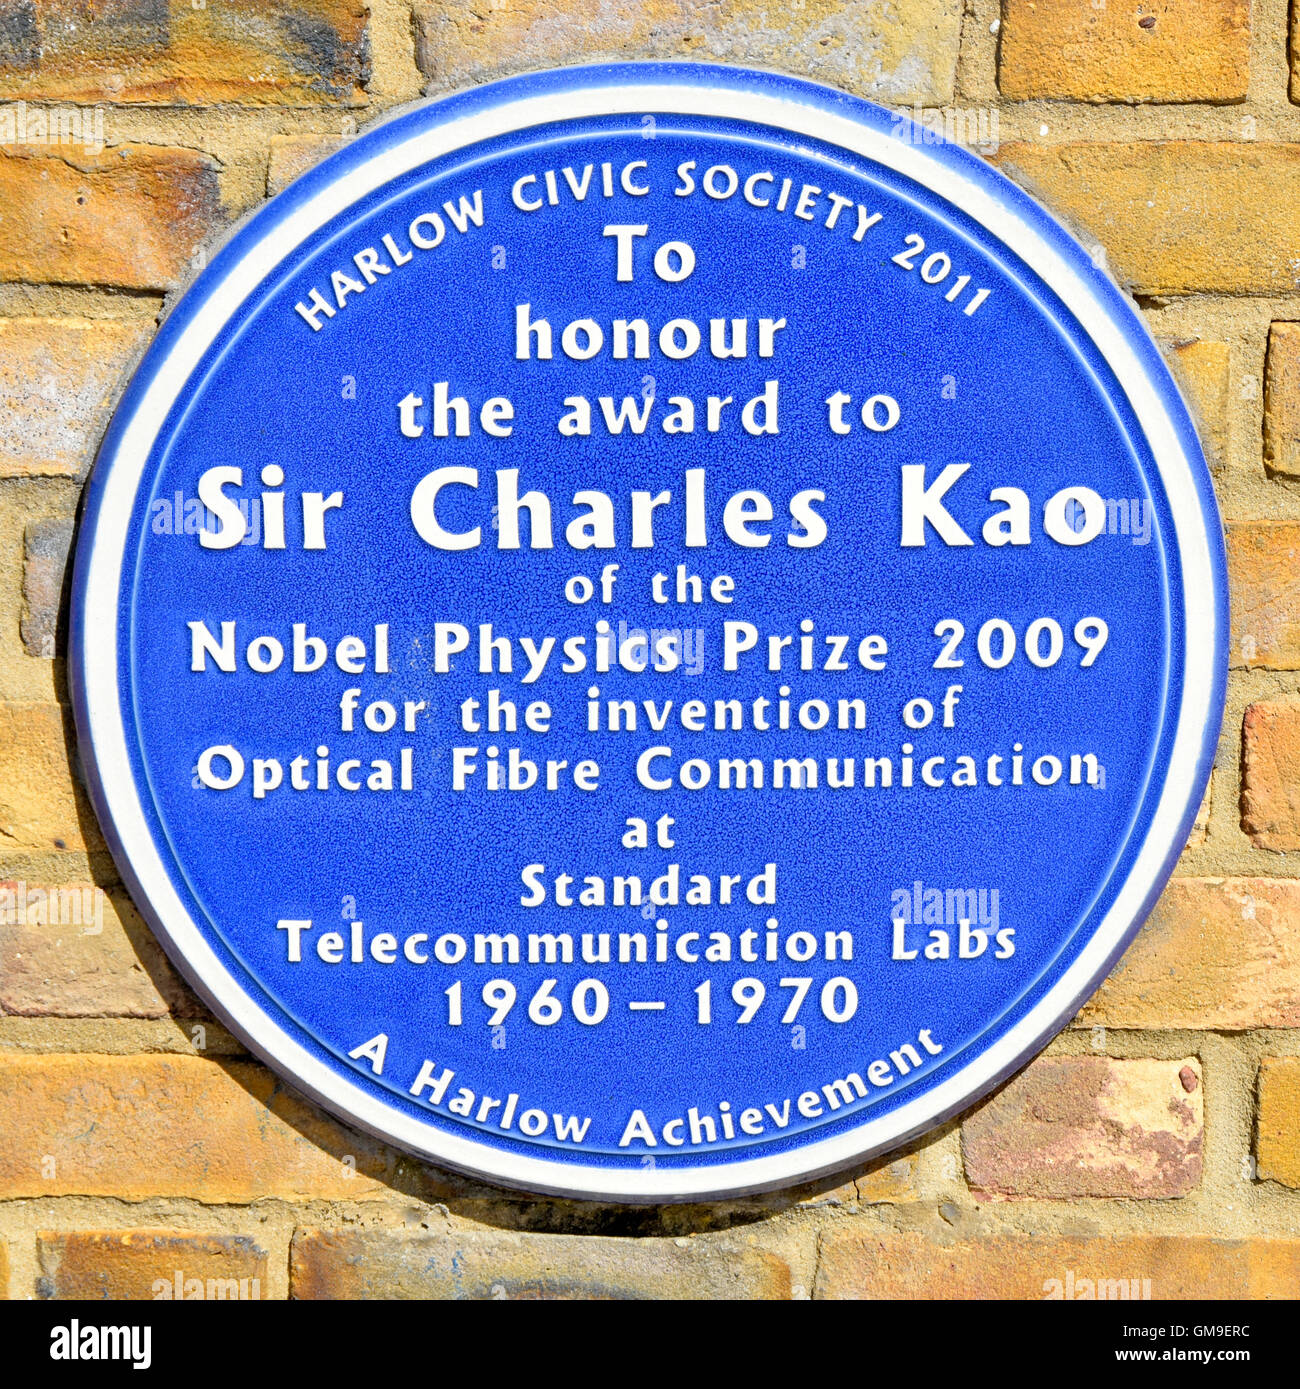 Blue Plaque Harlow Essex England UK Civic Centre honours award of Nobel Physics Prize 2009 to Sir Charles Kao for work in Optical Fibre Communication Stock Photo